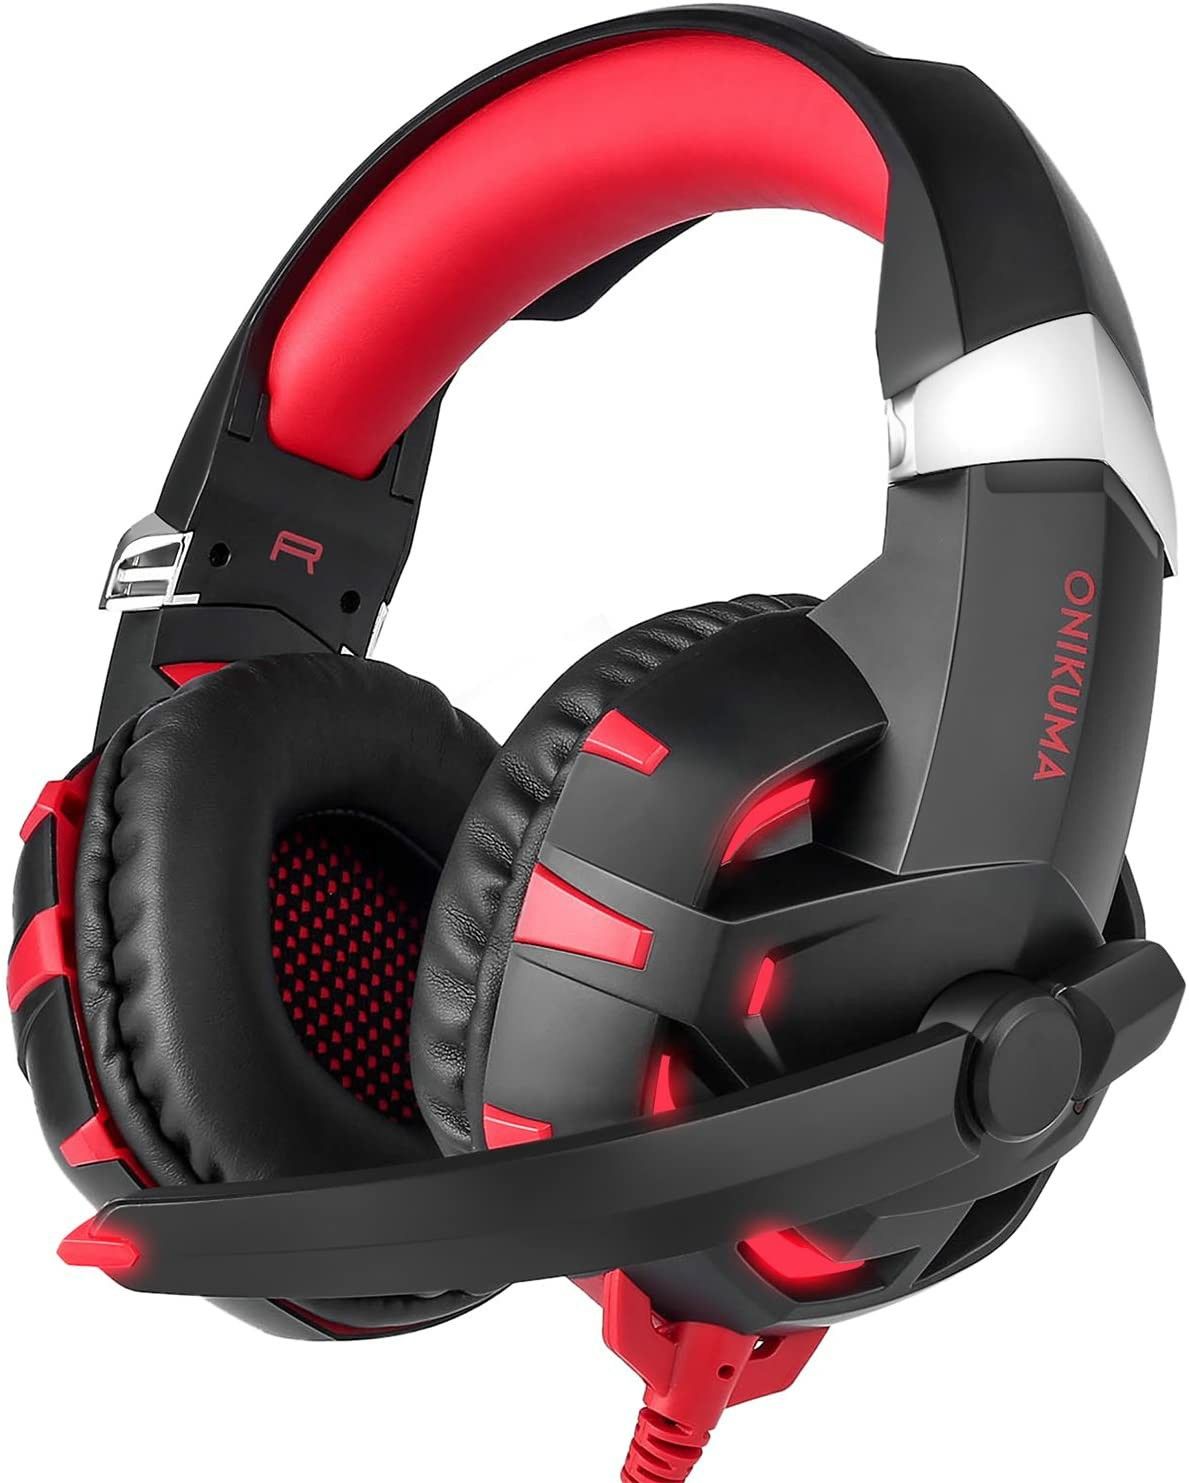 New!! Stero Gaming Headset (PS4, Xbox One, Switch)... $45